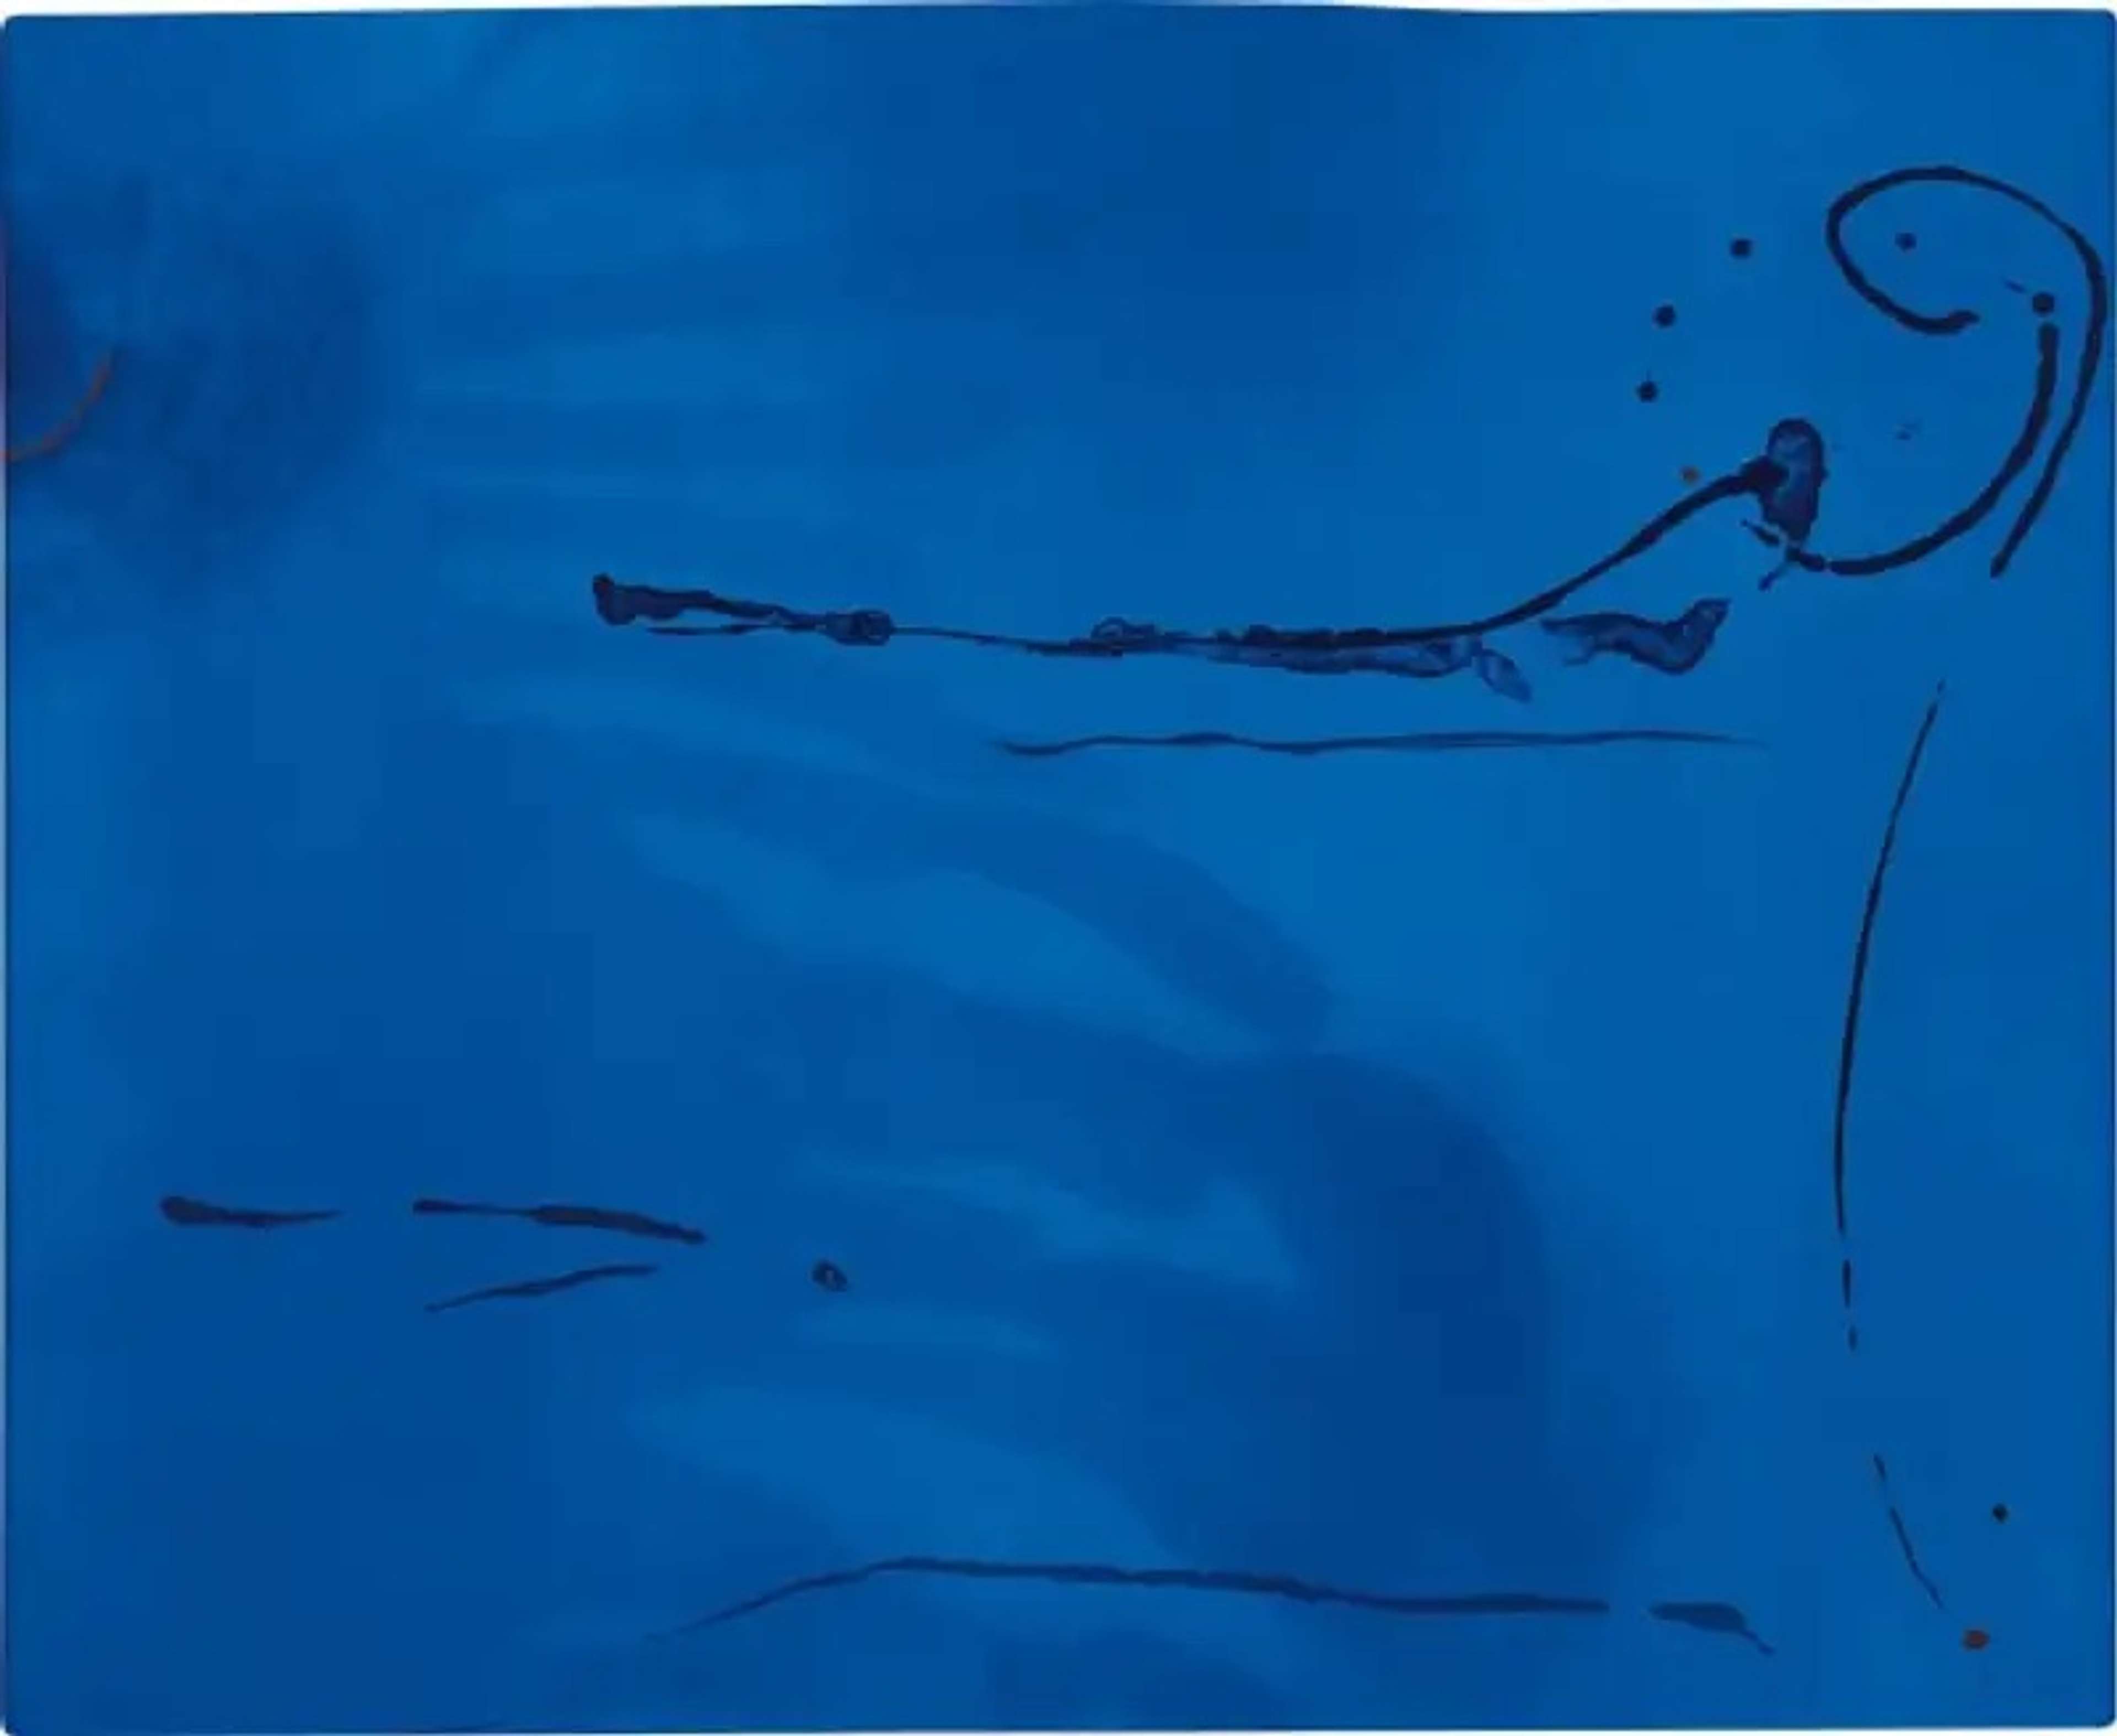 Helen Frankenthaler’s Blue Current. An abstract expressionist intaglio of deep blue water currents.